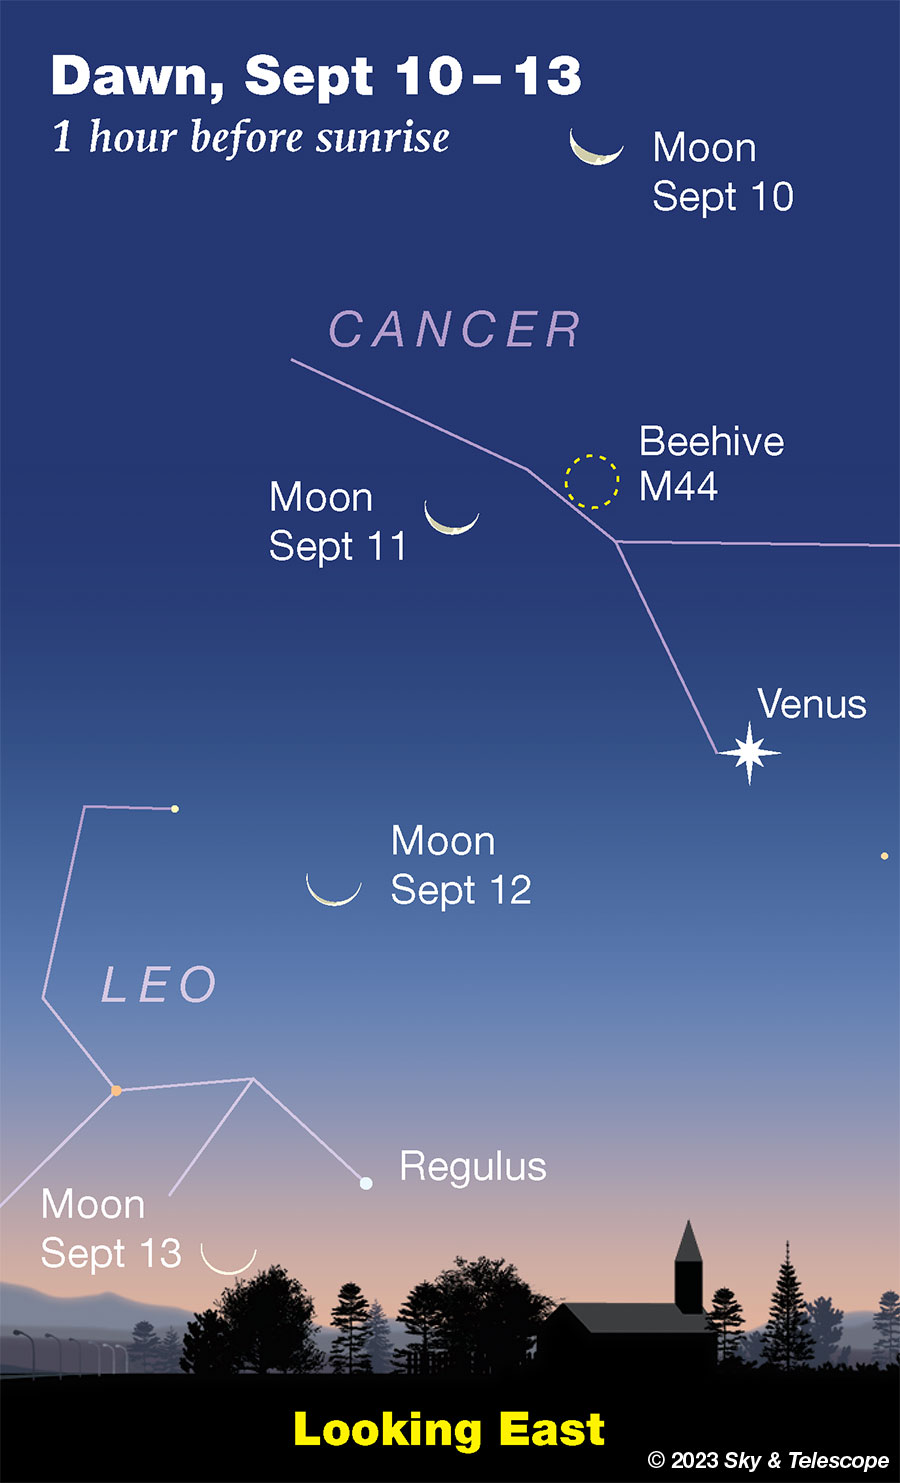 Thinning, waning crescent Moon with Venus at dawn, Sept 10-13